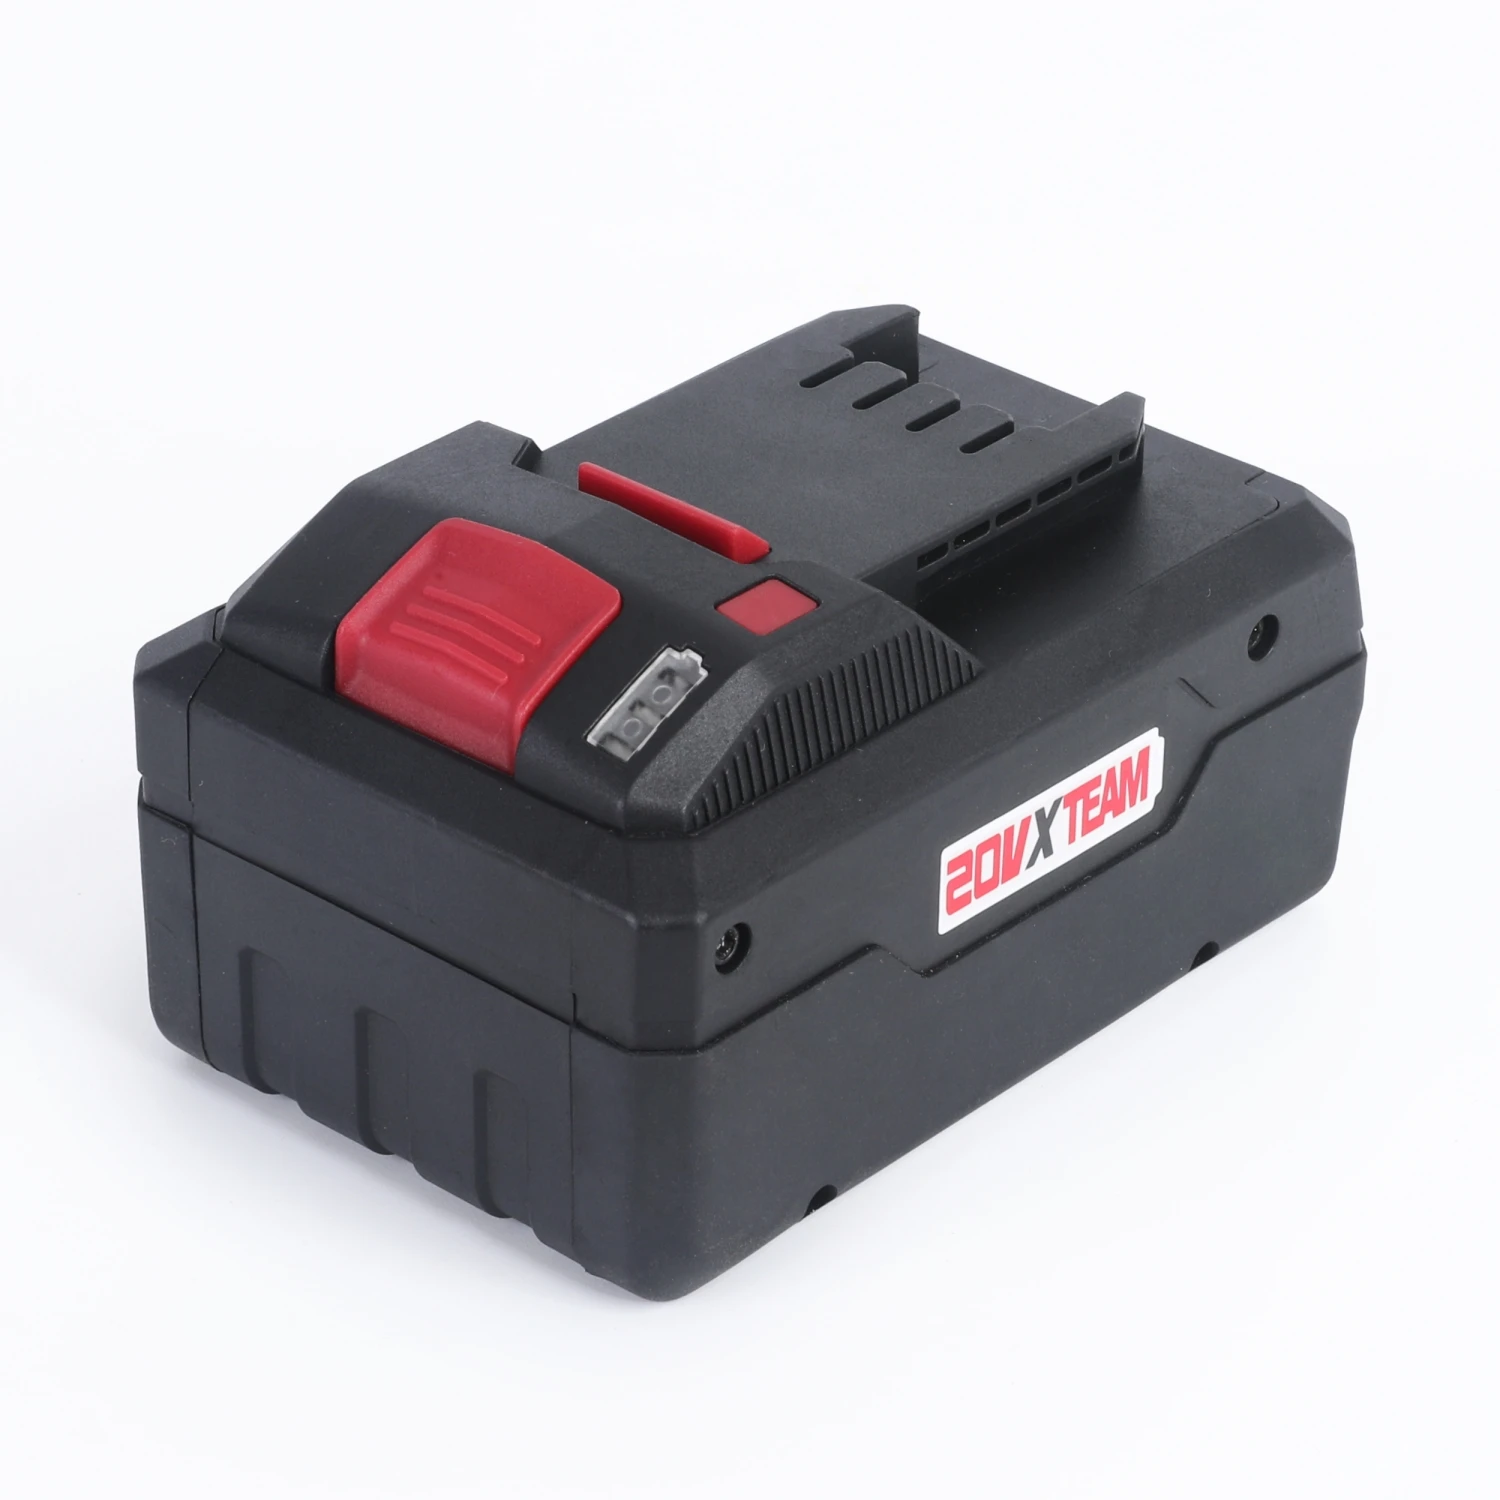 20V 8Ah Lithium-Ion Akkupack for Parkside X 20V Team Series Power Tools for  PAPS 208A1 PAPS 204 A1 PAP 20 A3 PAP 20 B3